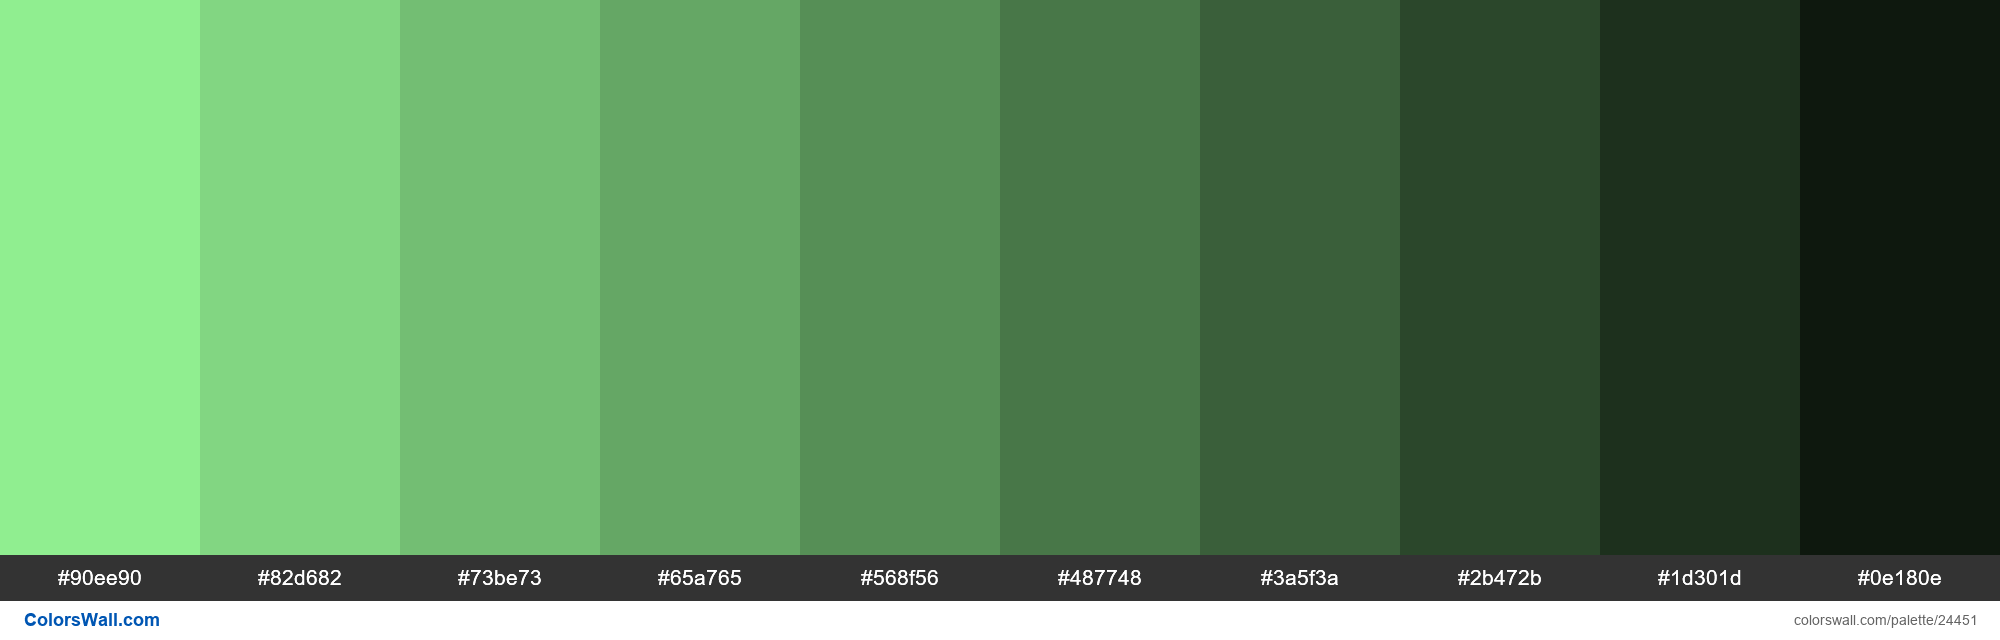 colorswall on X: Shades of Light Green #90EE90 hex color #90ee90